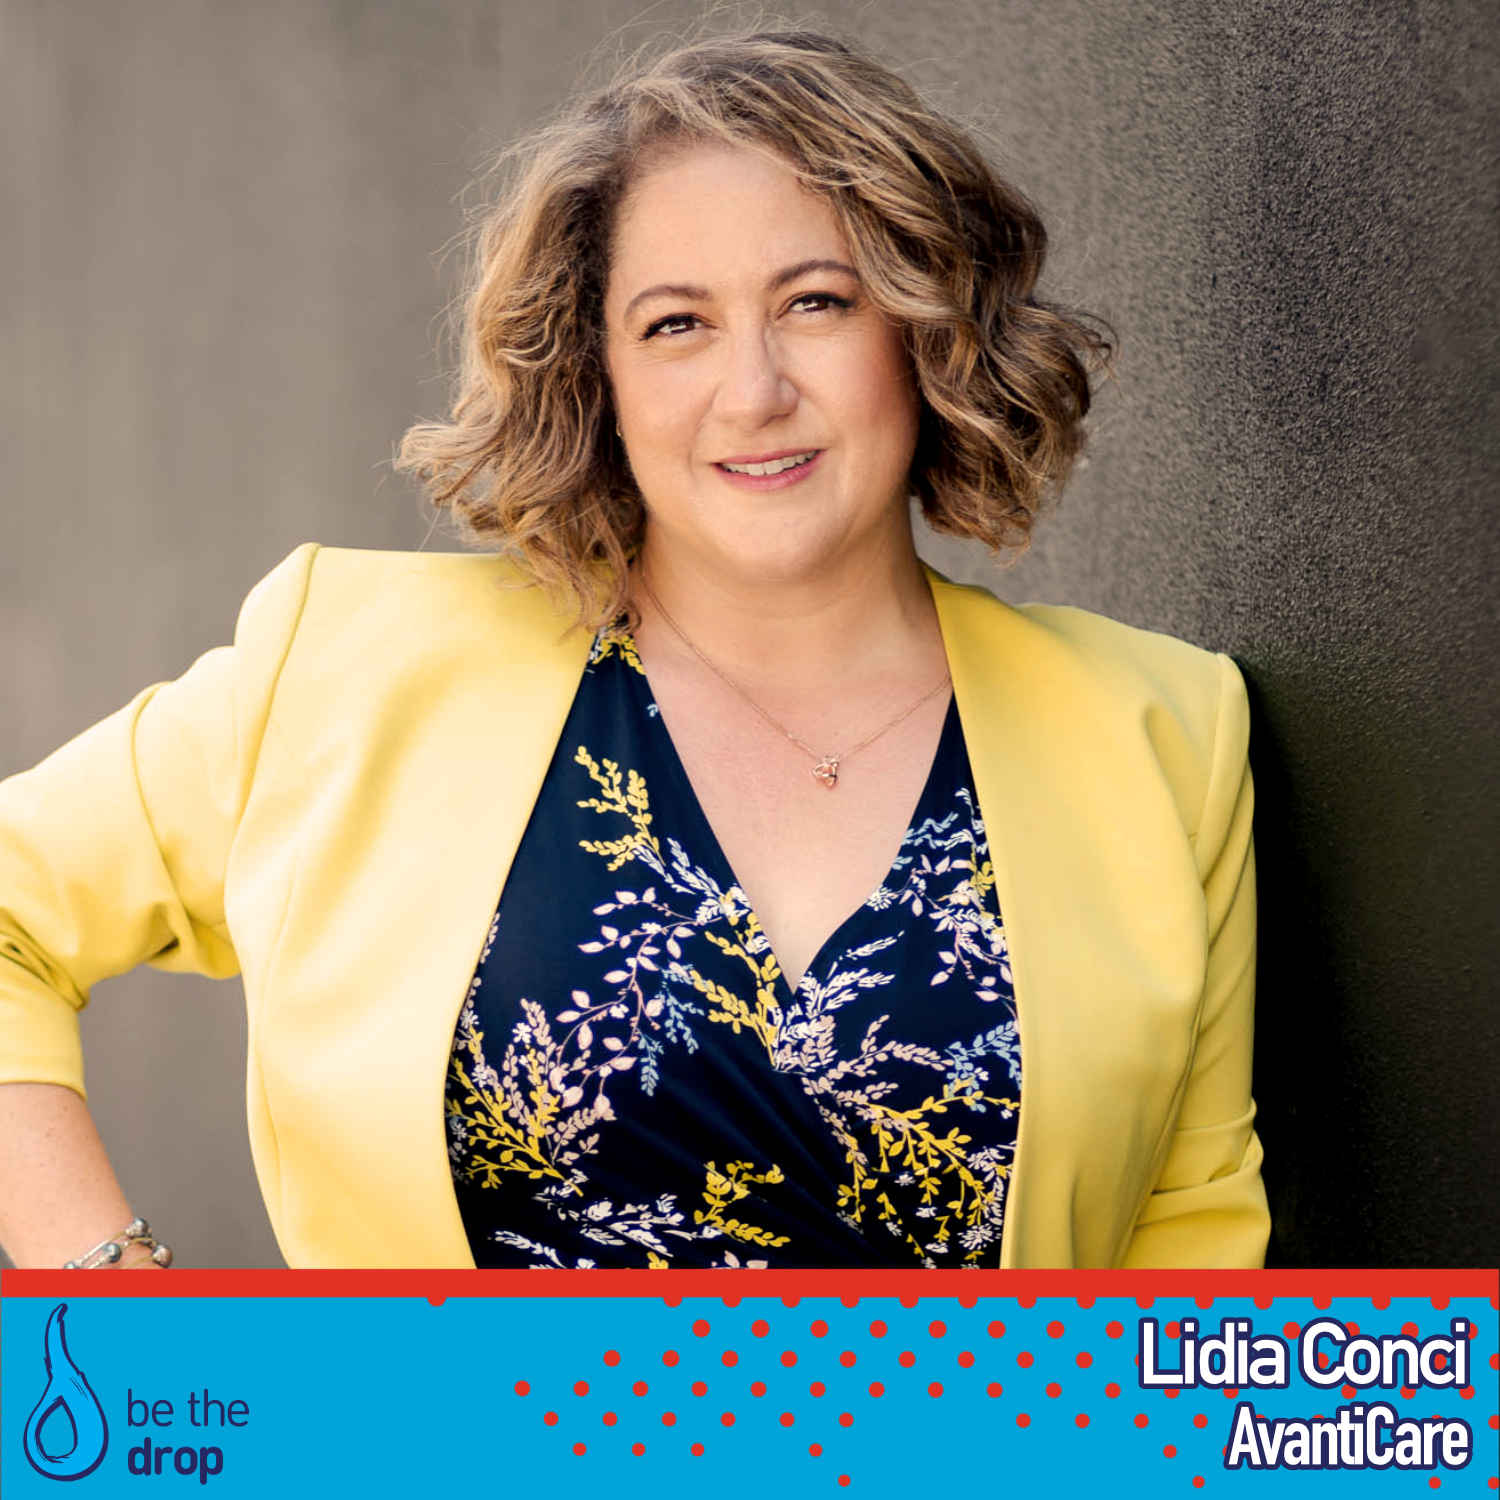 Lidia Conci discusses how to become a business disruptor